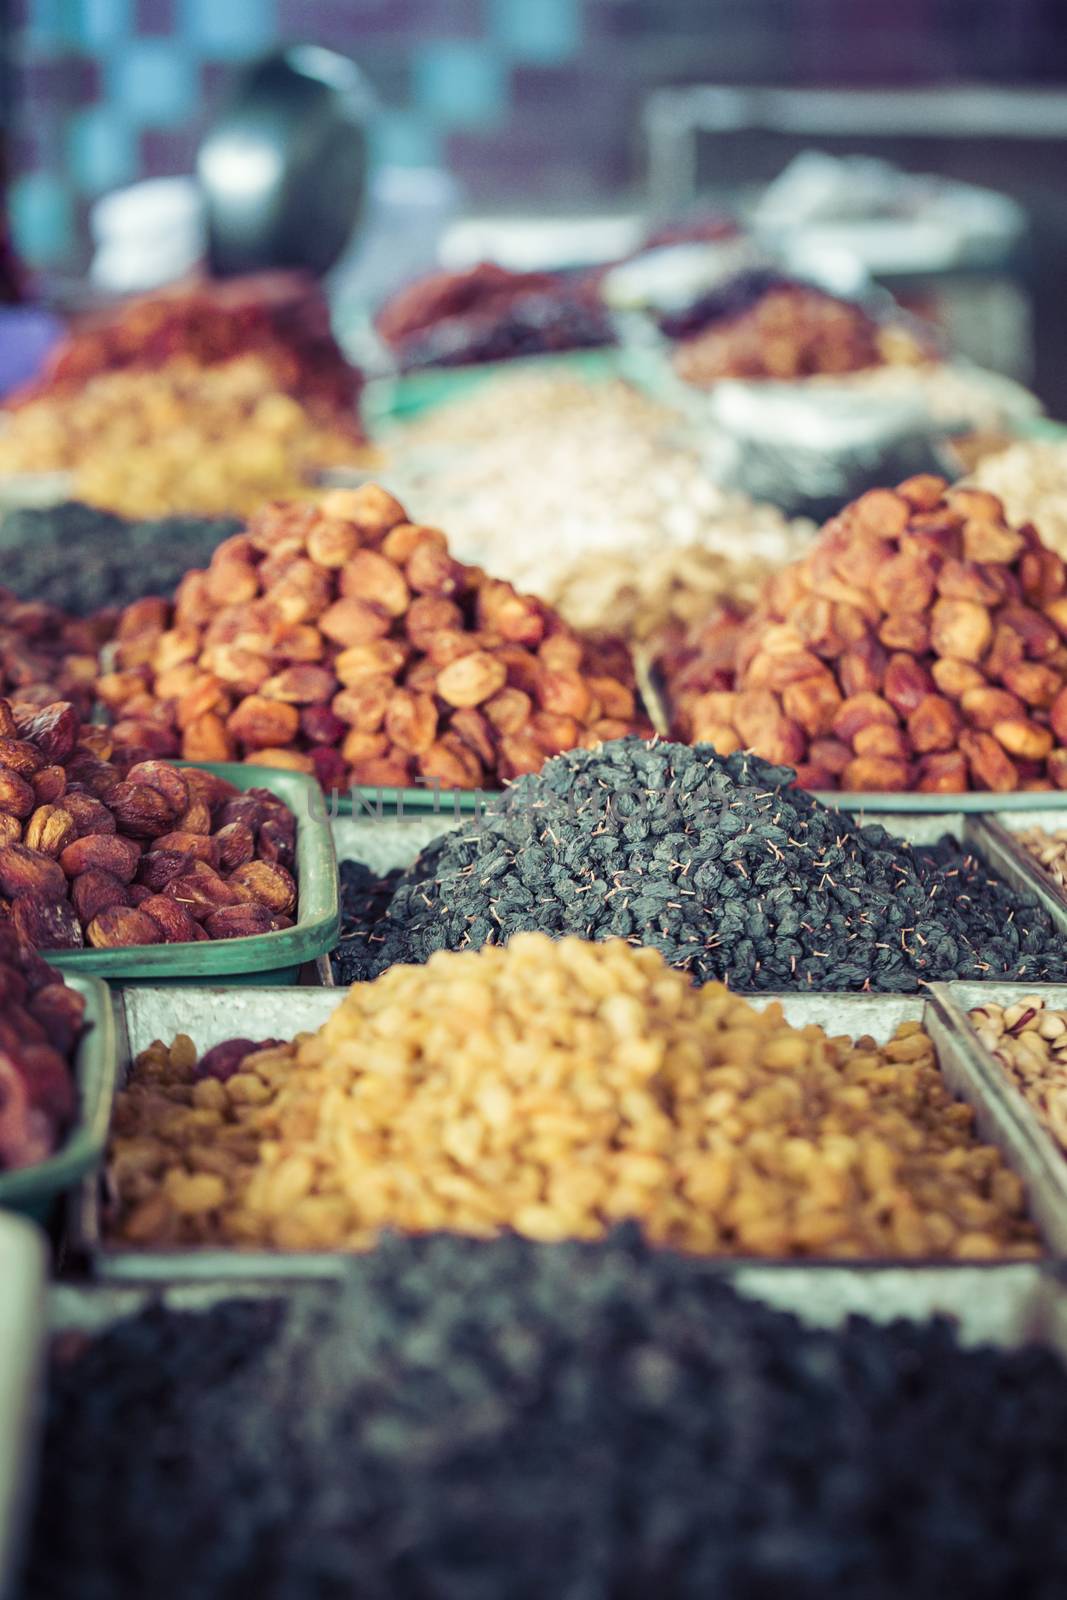 Dry fruits and spices like cashews, raisins, cloves, anise, etc. on display for sale in a bazaar in Osh Kyrgyzstan.